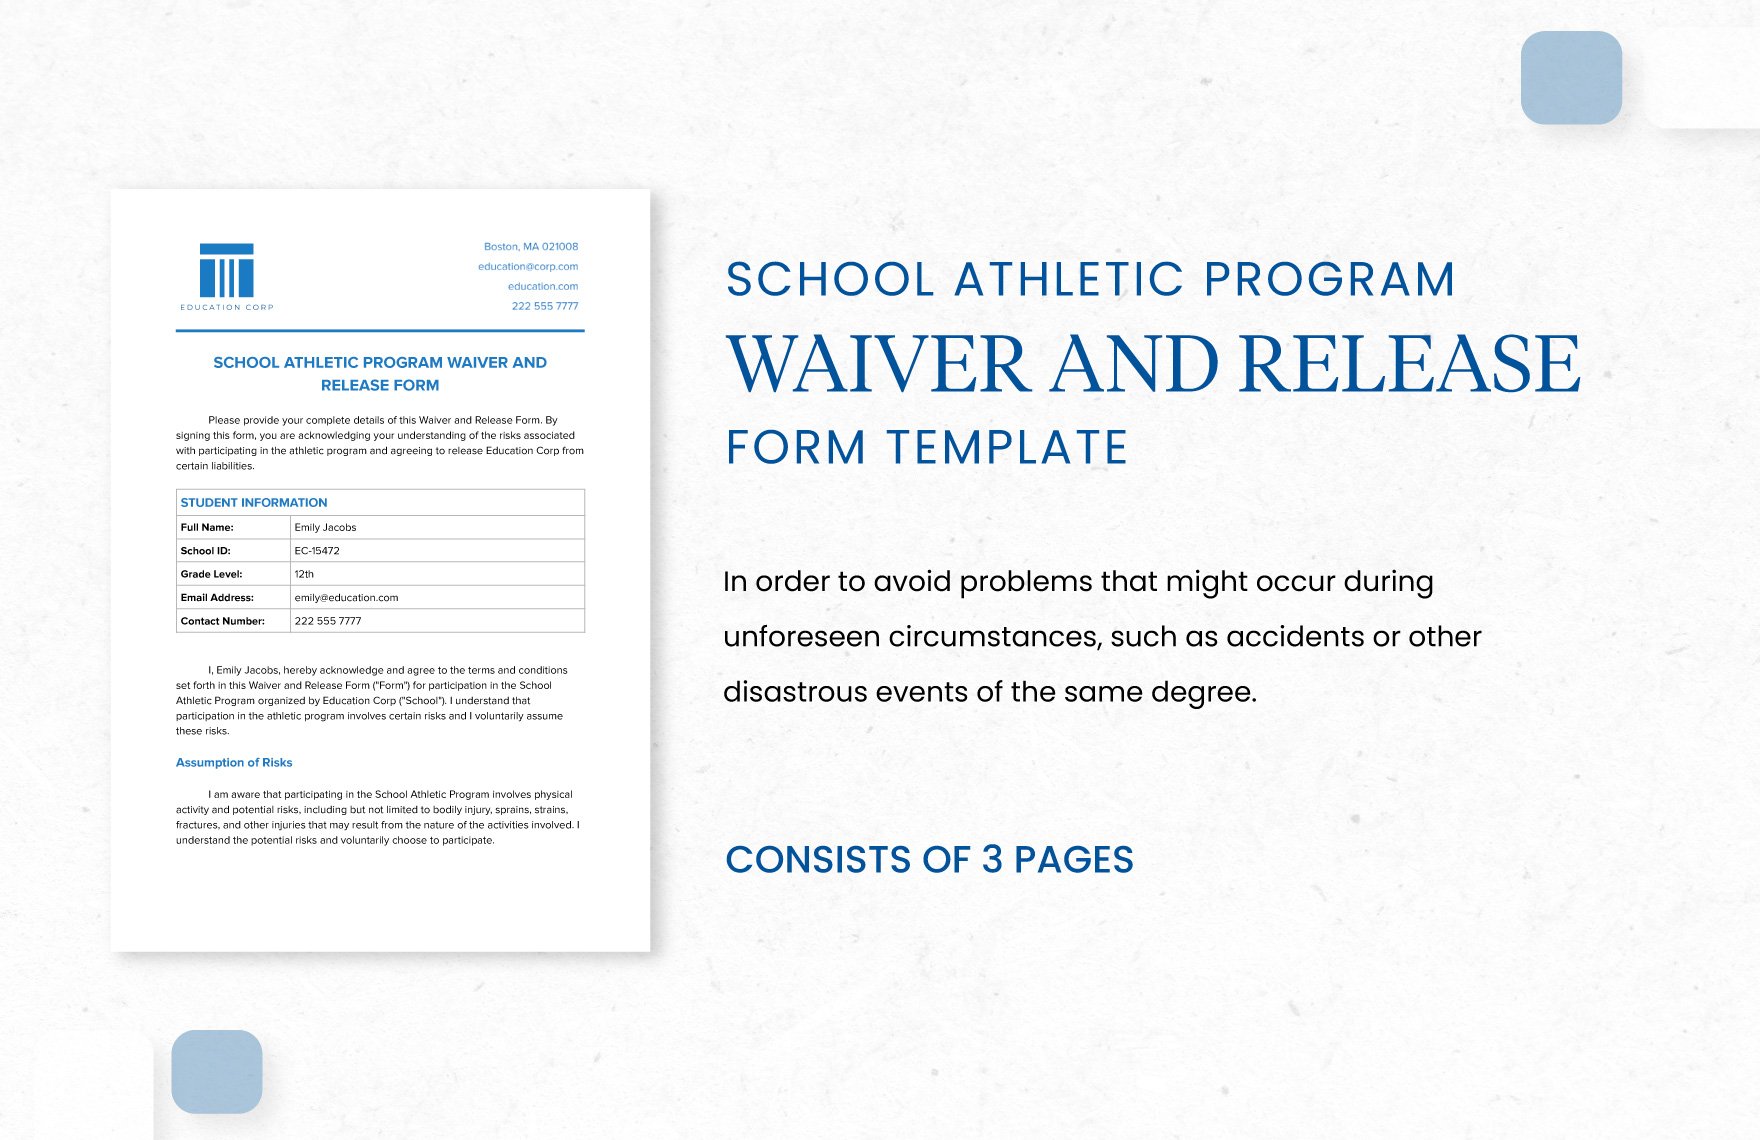 School Athletic Program Waiver and Release Form Template in Word, Google Docs, PDF